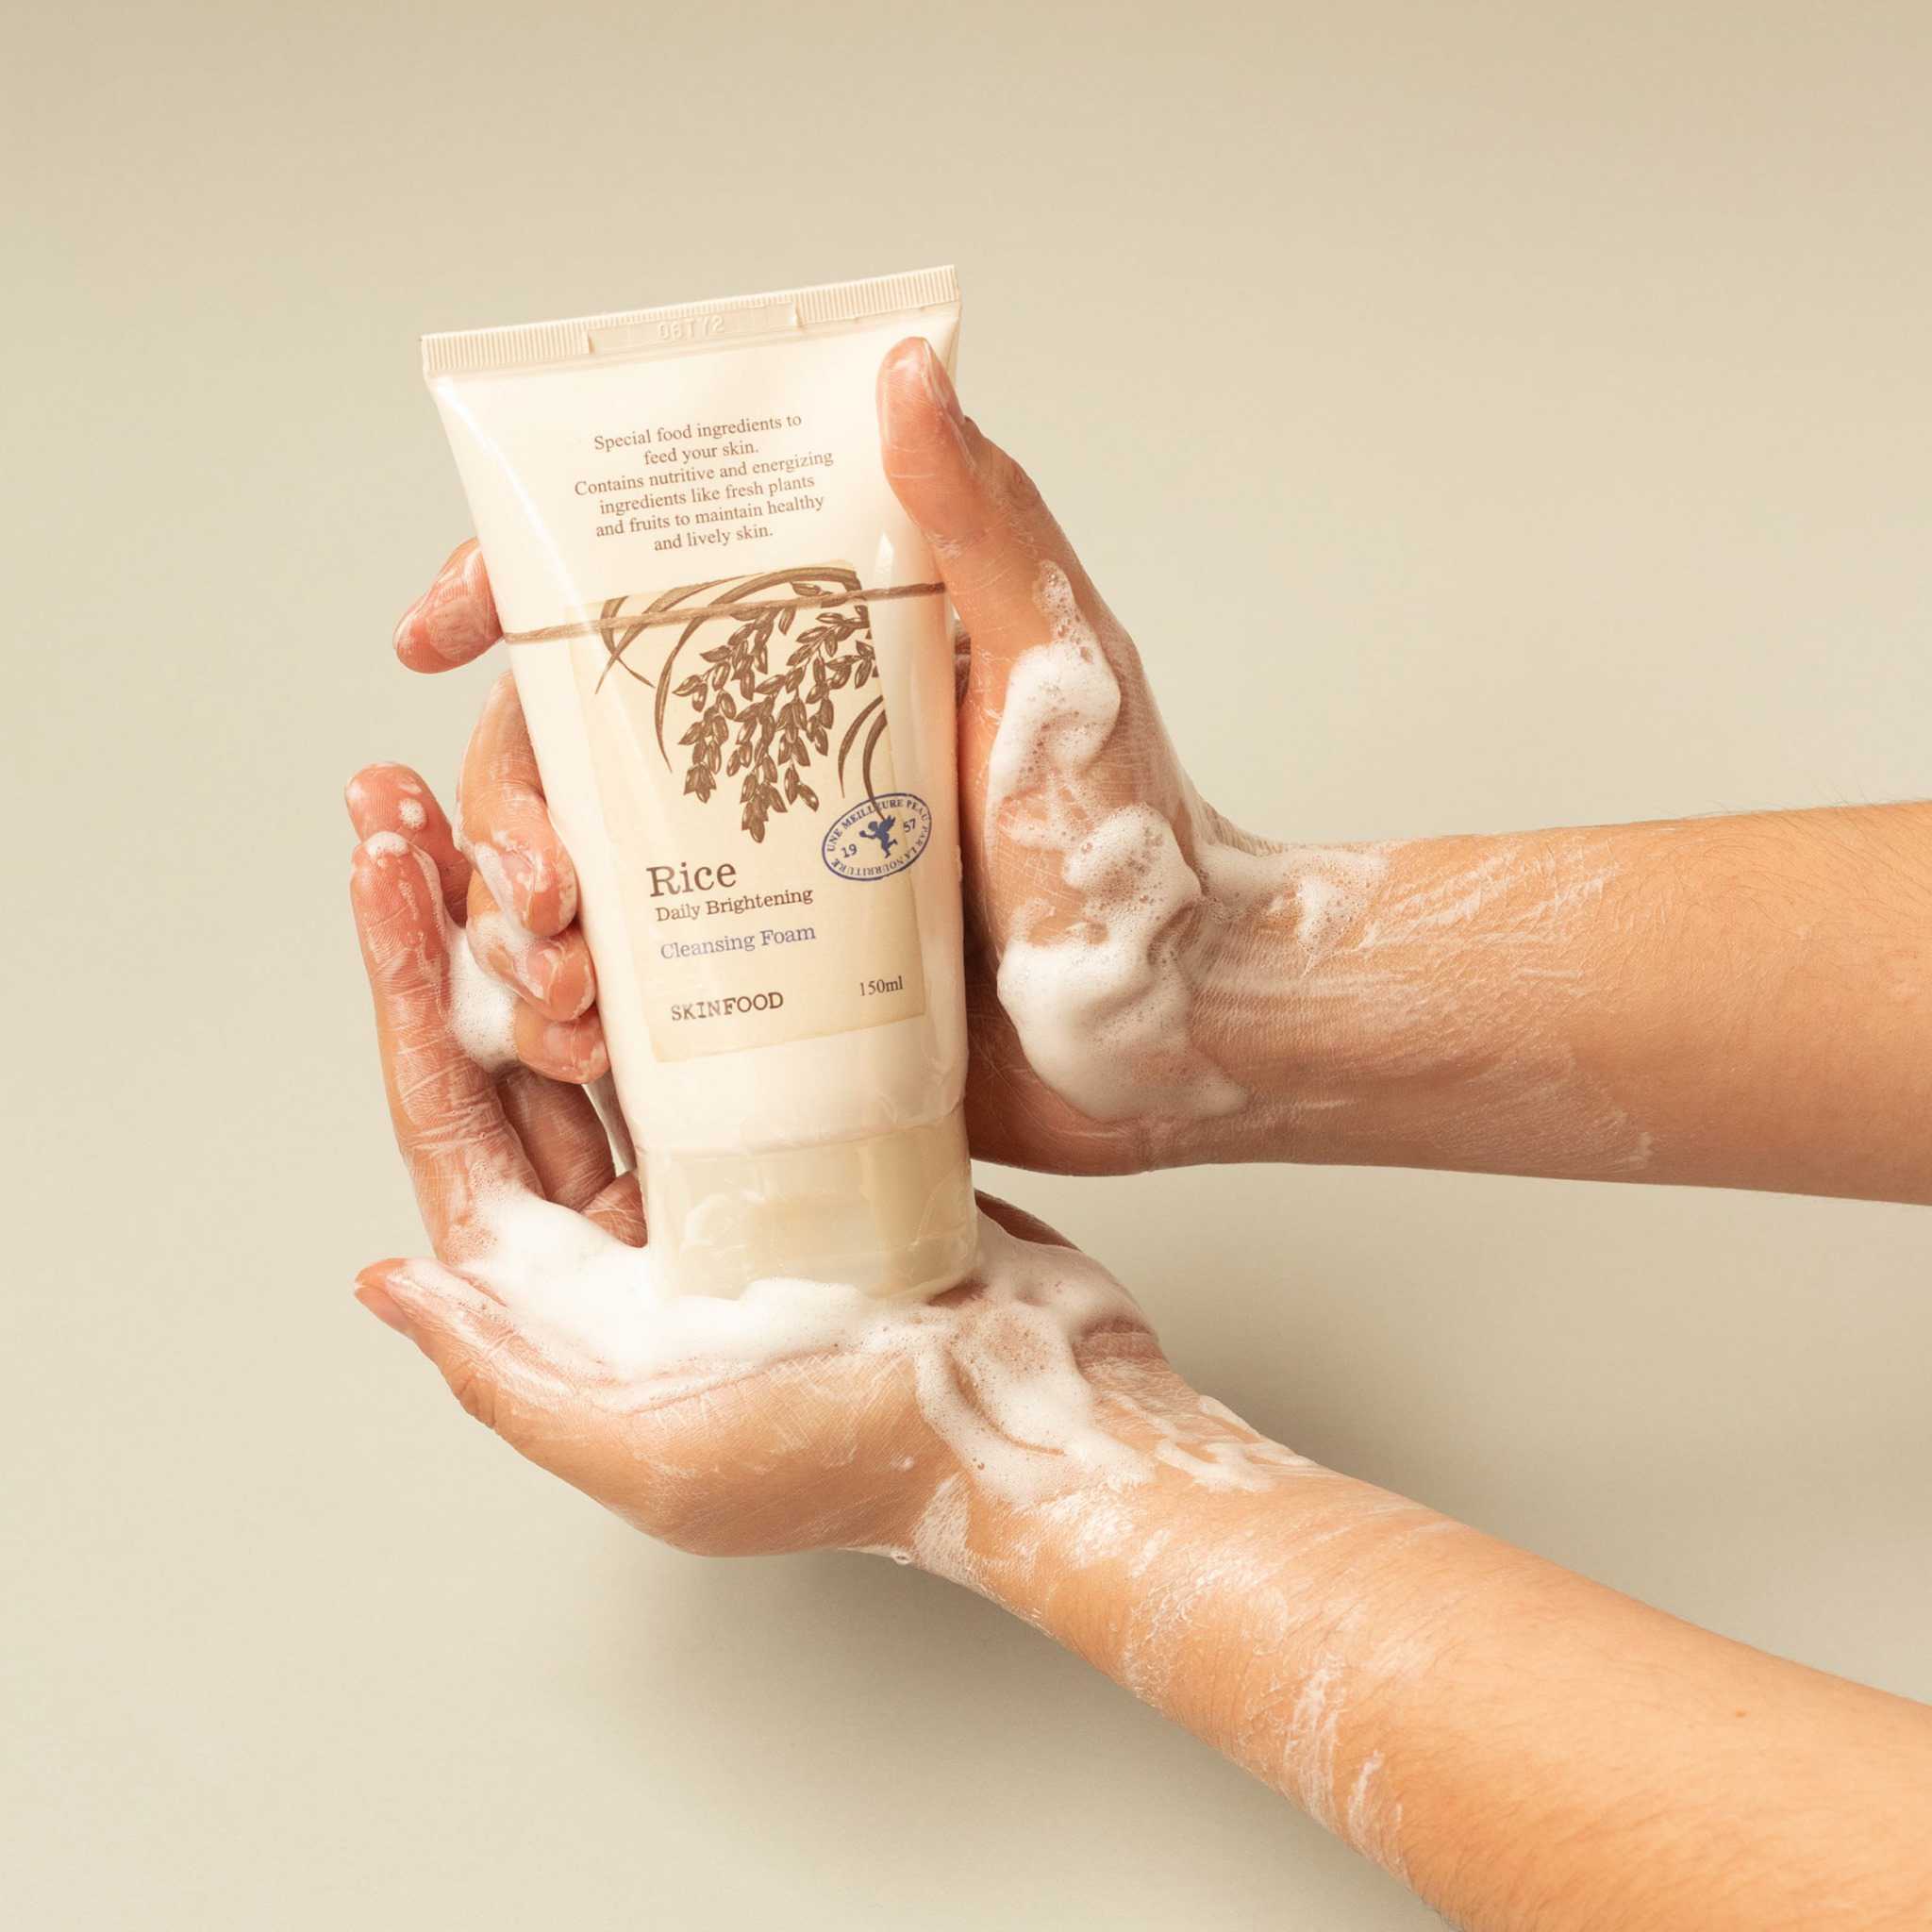 SKINFOOD Rice Daily Brightening Cleansing Foam